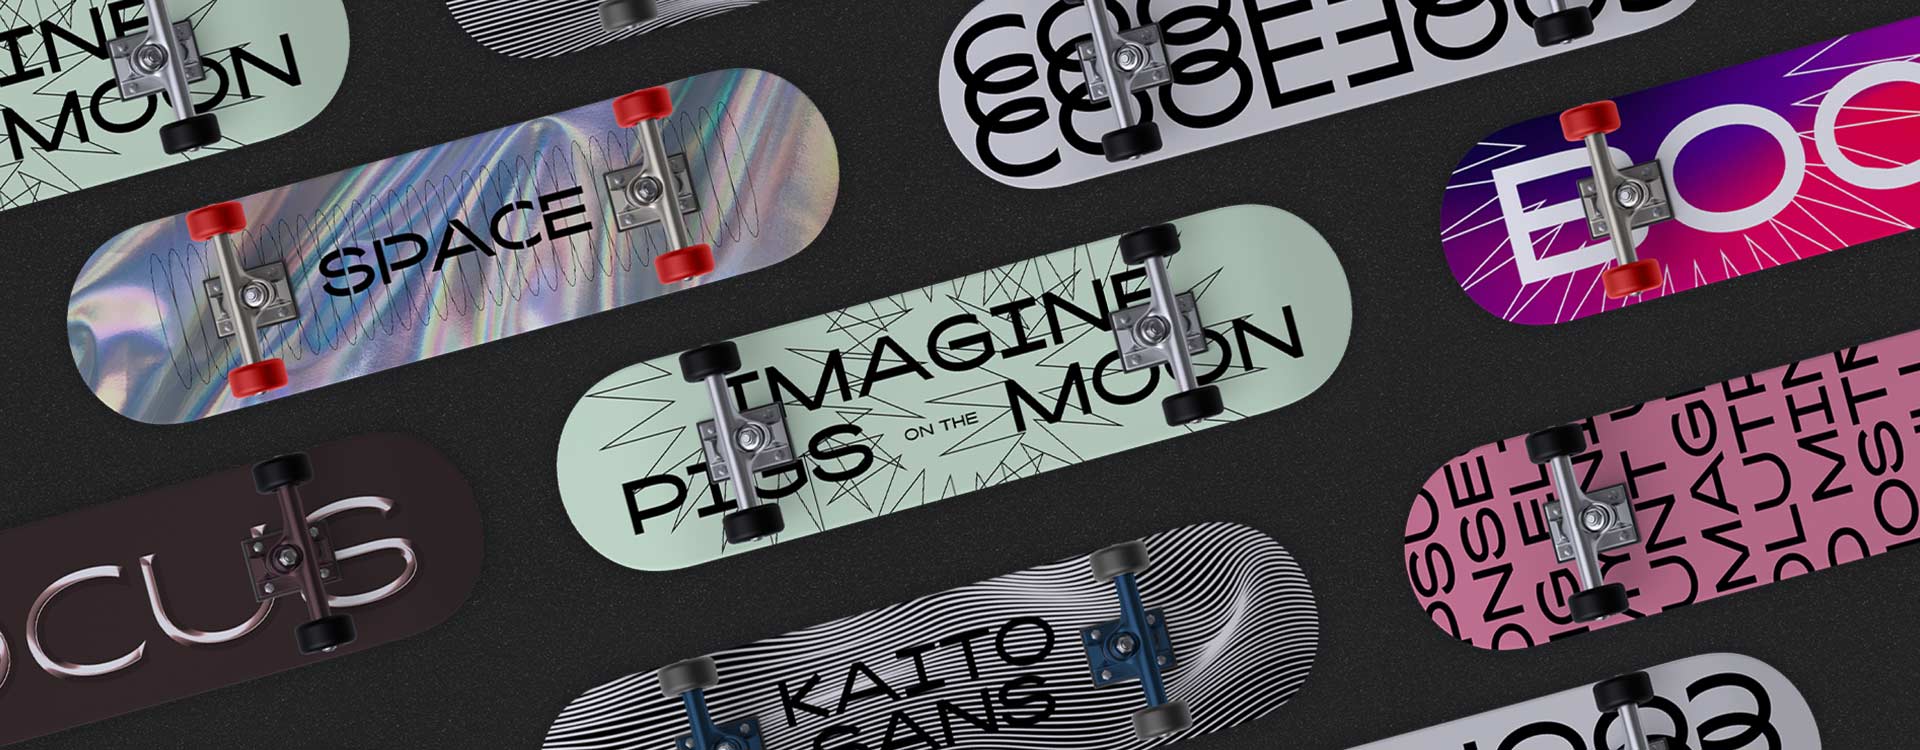 Skates decorated with type using Kaito Sans